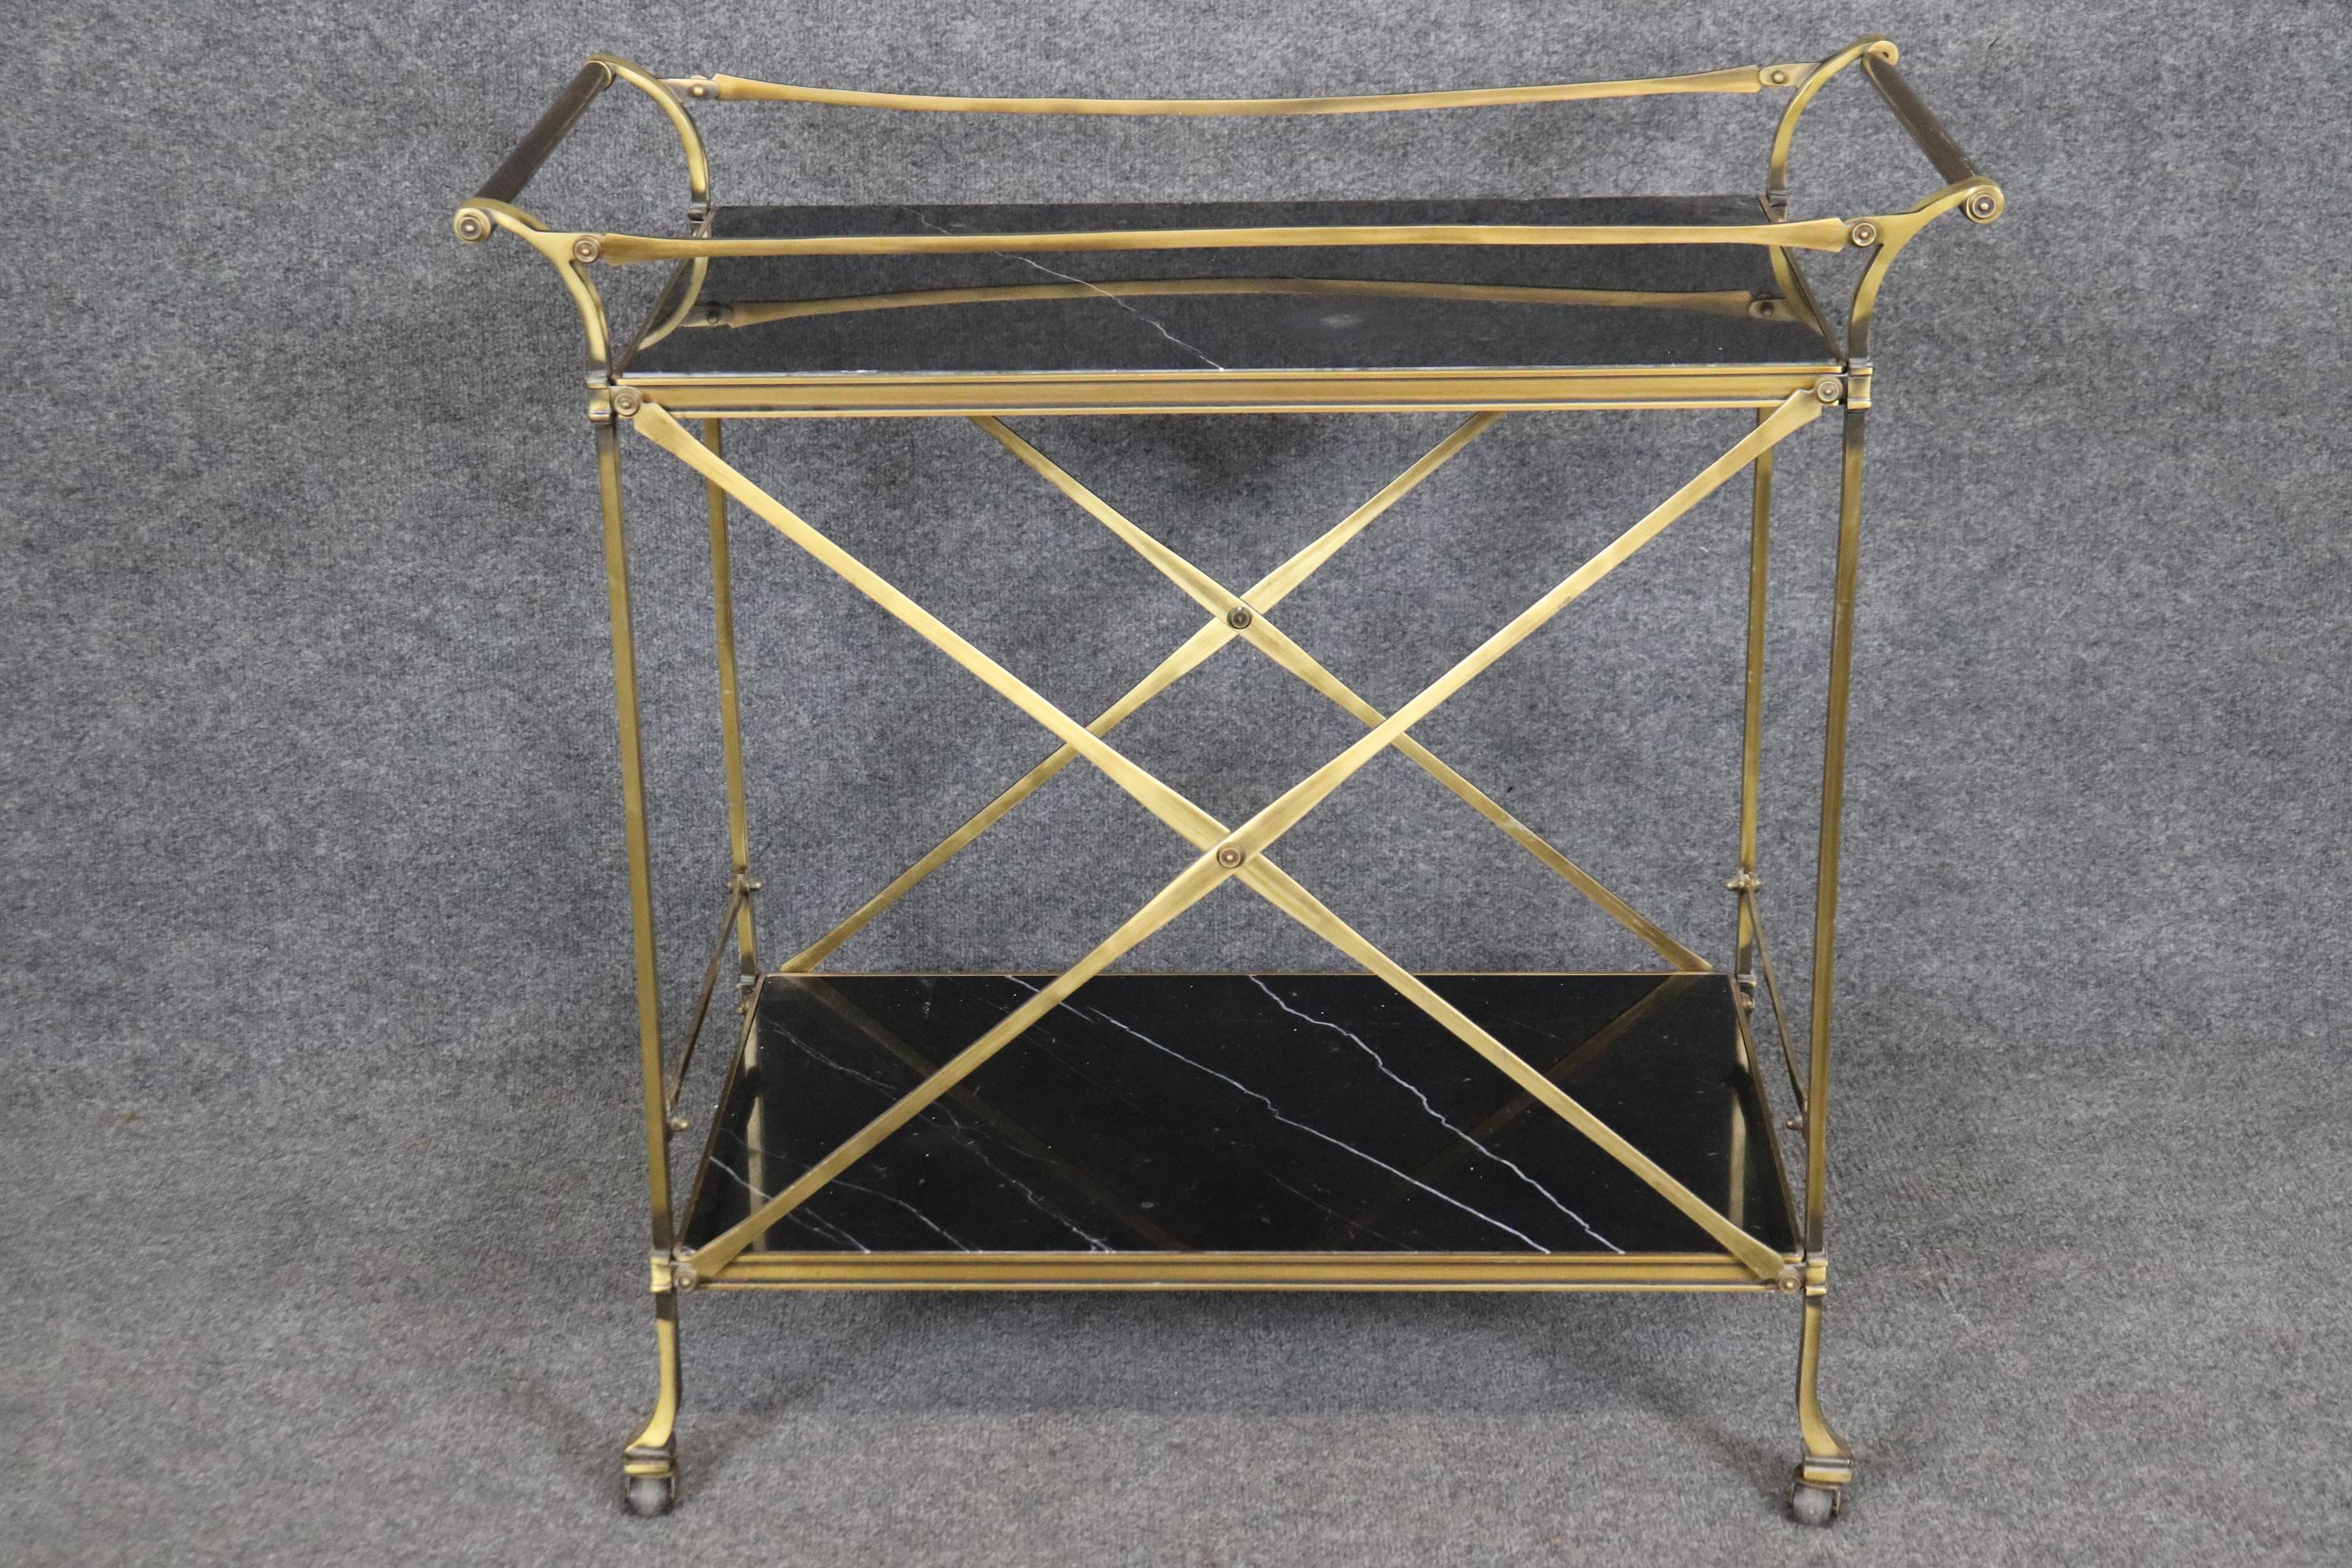 This is a superb hand-forged brass and black and white marble two tier bar or liquor cart. of course you can use it for pastries or wine. The piece is in very good condition and has no major issues to mention beyond minor signs of use. Measures 32